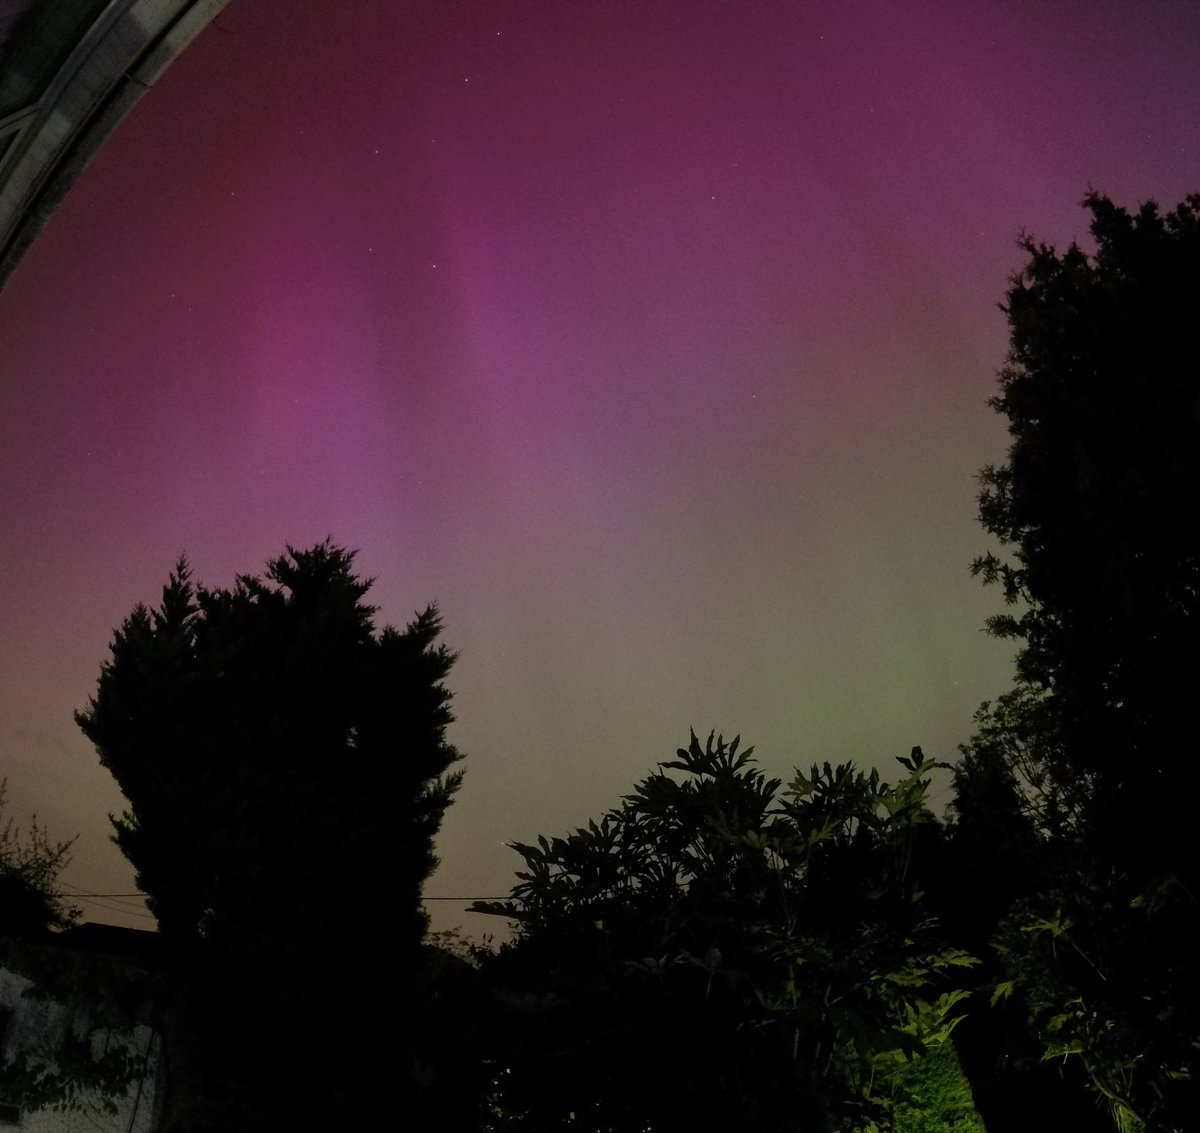 Gosh. Quite incredible scenes here in #NorthSomerset of this powerful geomagnetic storm & resultant #Auroraborealis. Here pictured from my garden, with #Gopro